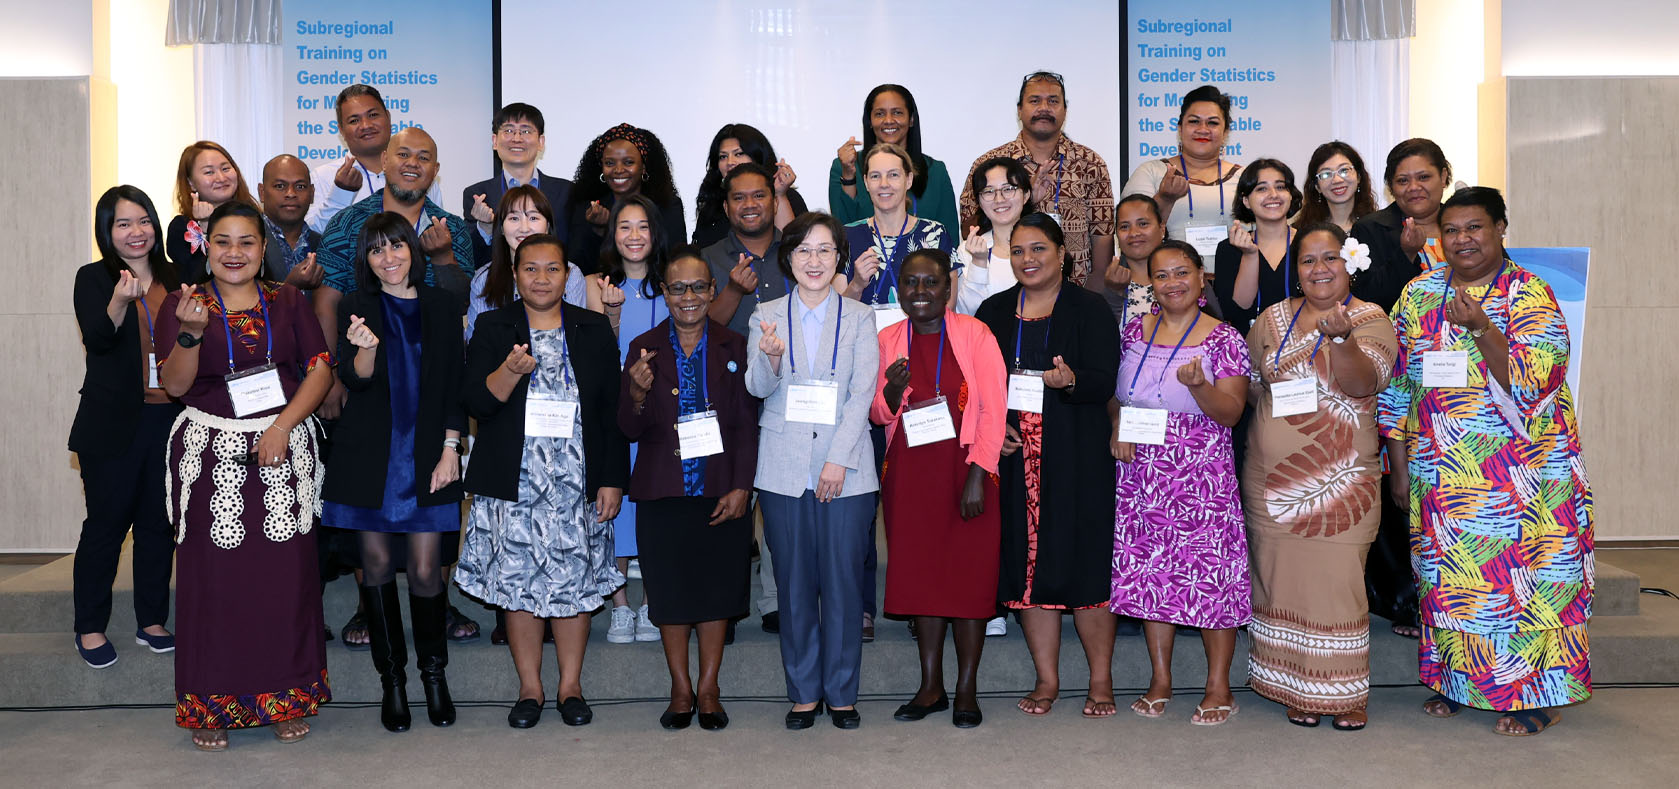 hoto: UN Women Centre of Excellence for Gender Equality